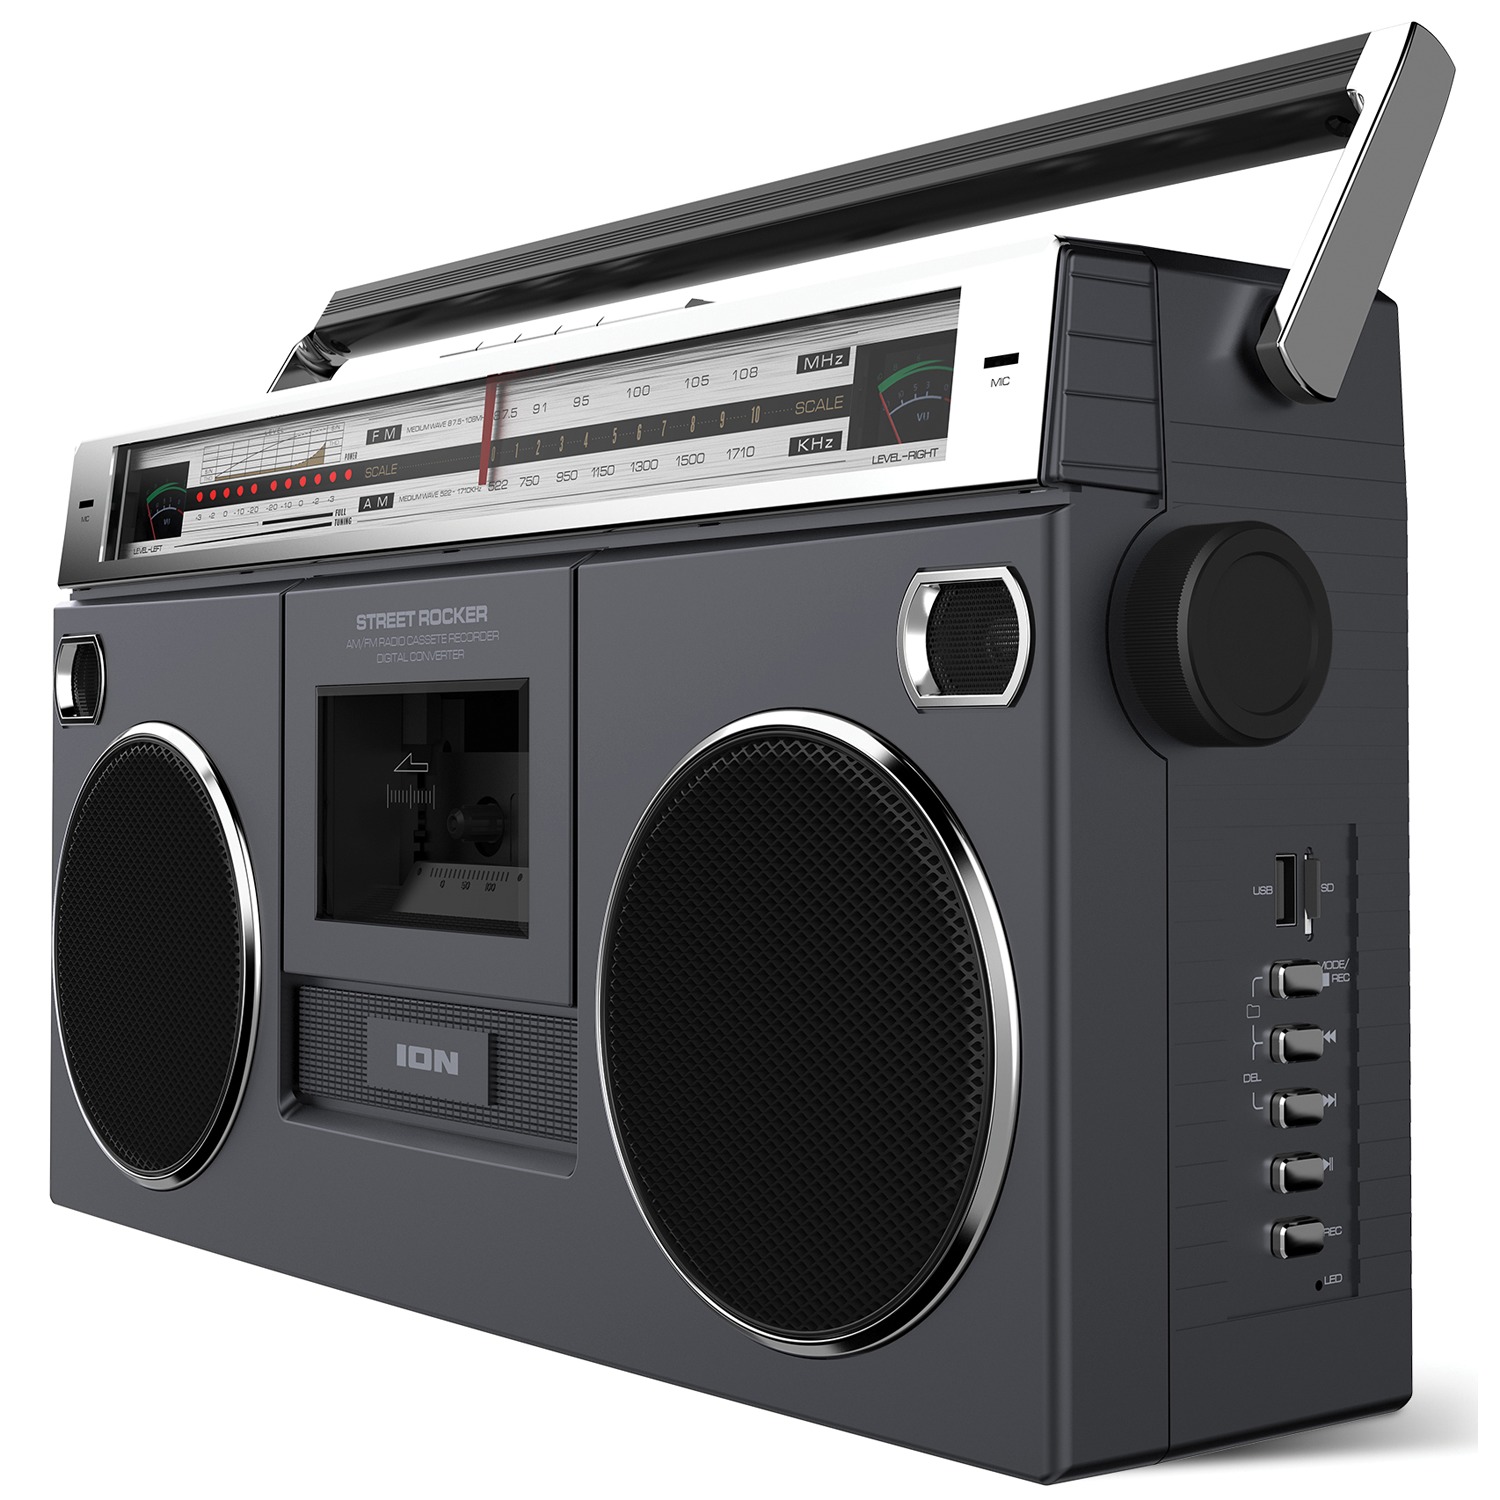 ION Audio Street Rocker Black - Portable Retro-Style Stereo Boombox with Wireless Streaming - image 1 of 2